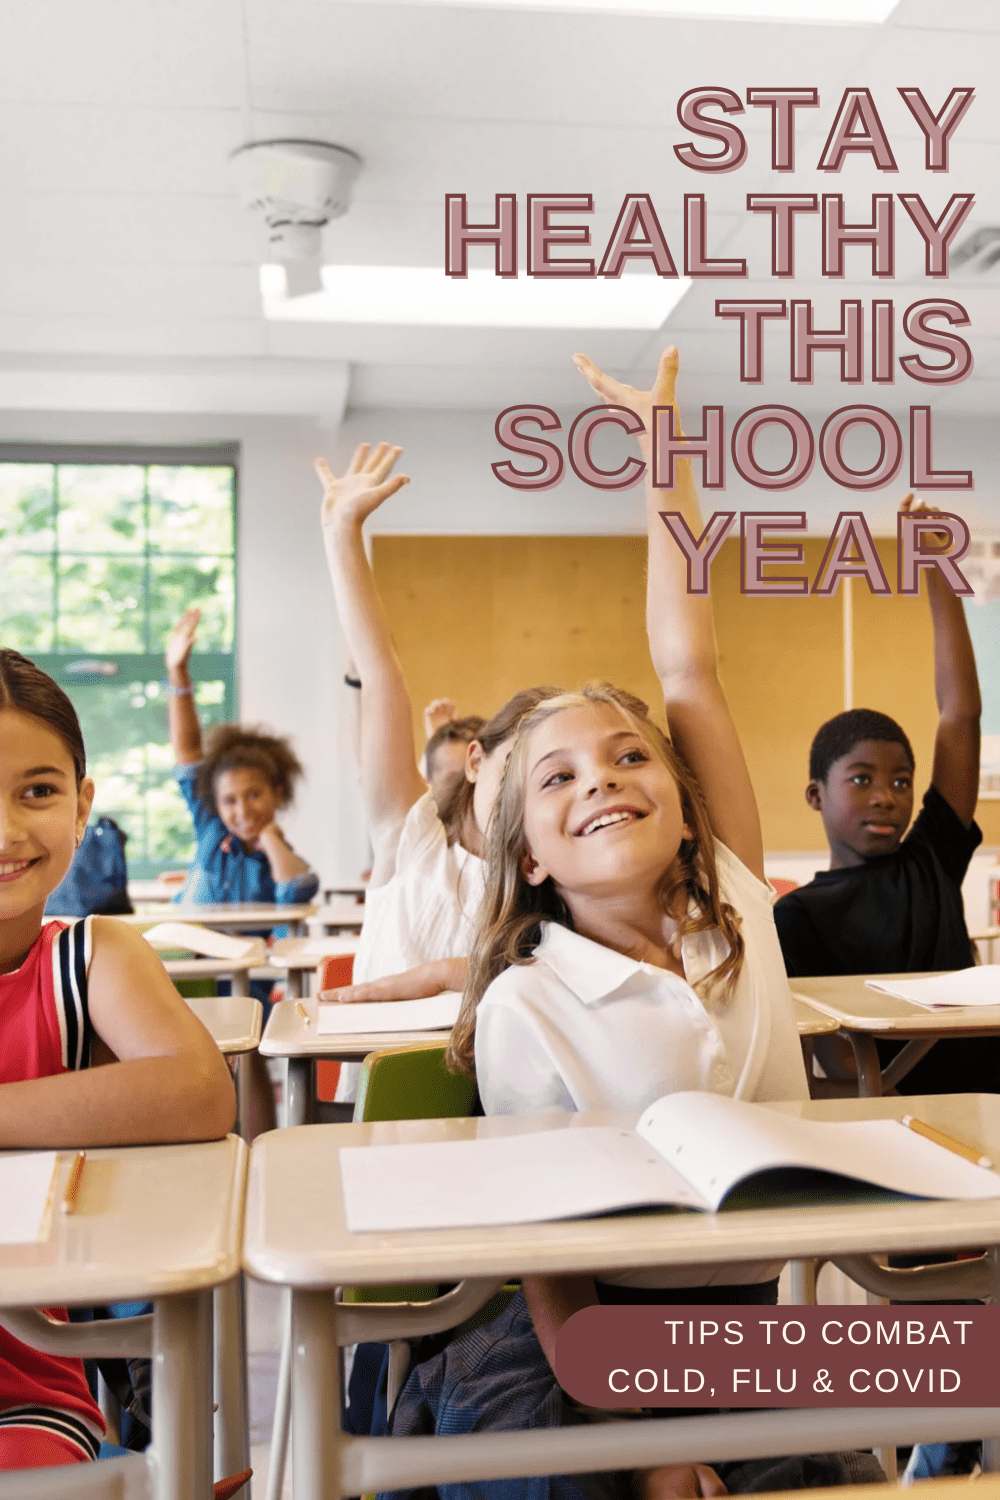 These three tips will keep your family healthy this school year.